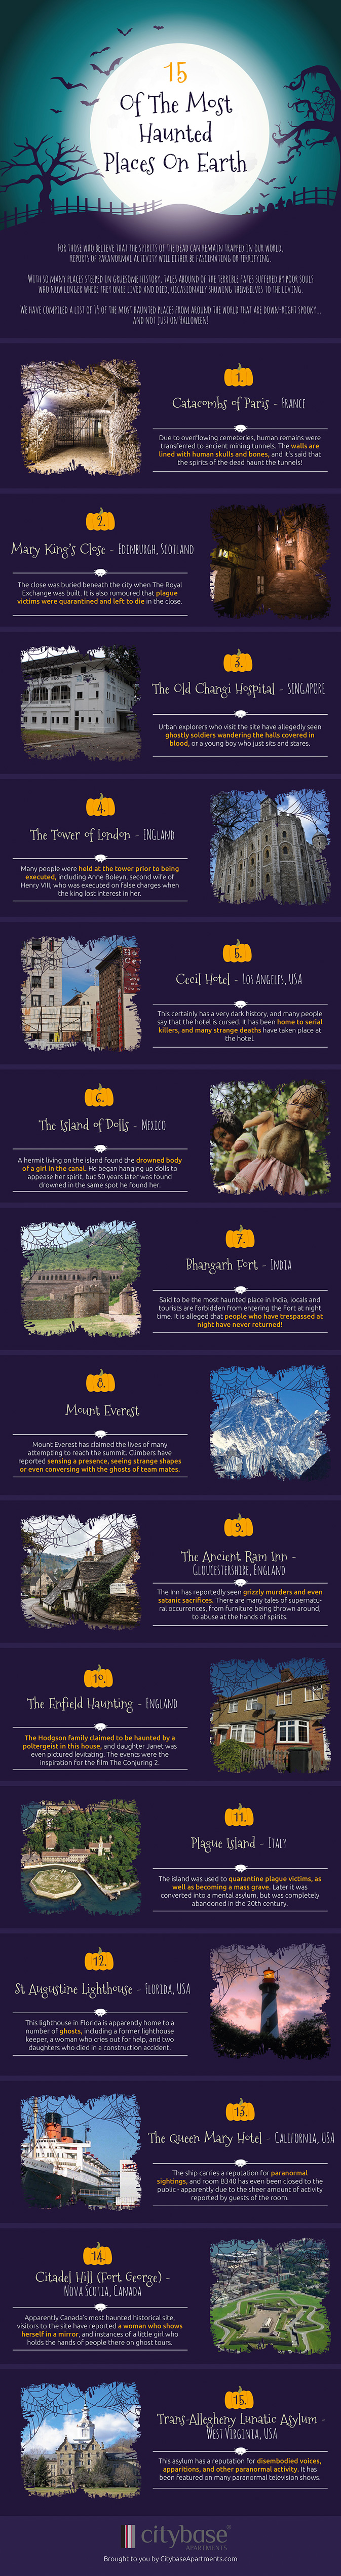 Beware! The world’s most haunted places in 1 infographic